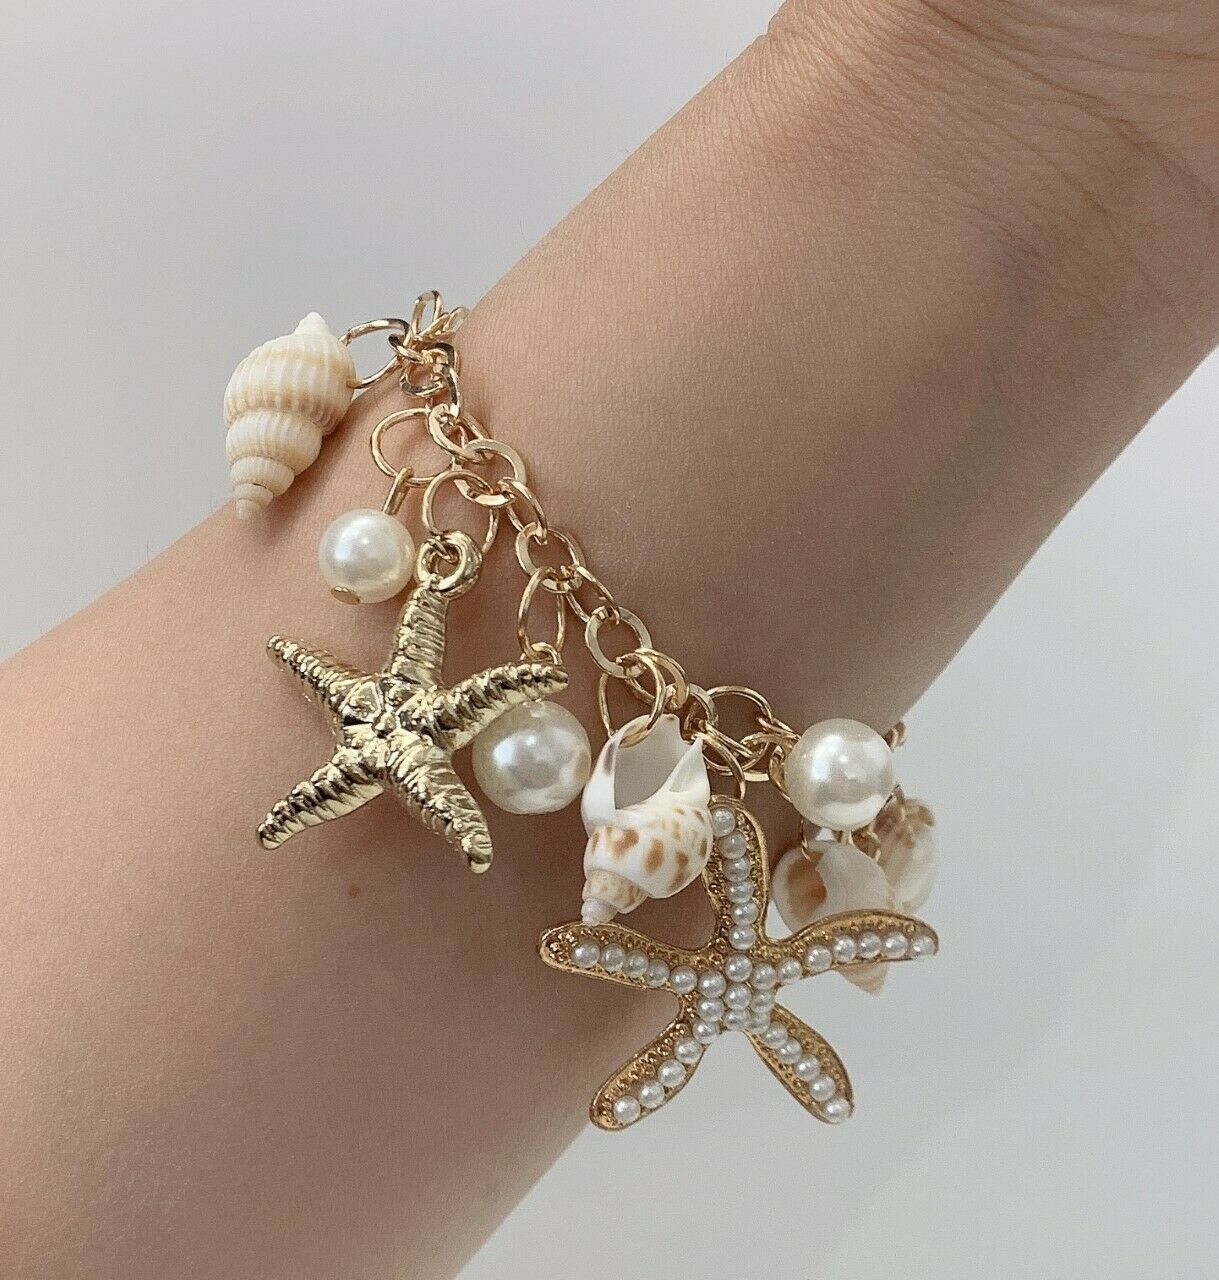 Gold Sea Shell Faux Pearl Beads Starfish Charms Statement Bracelet Chain Gift UK